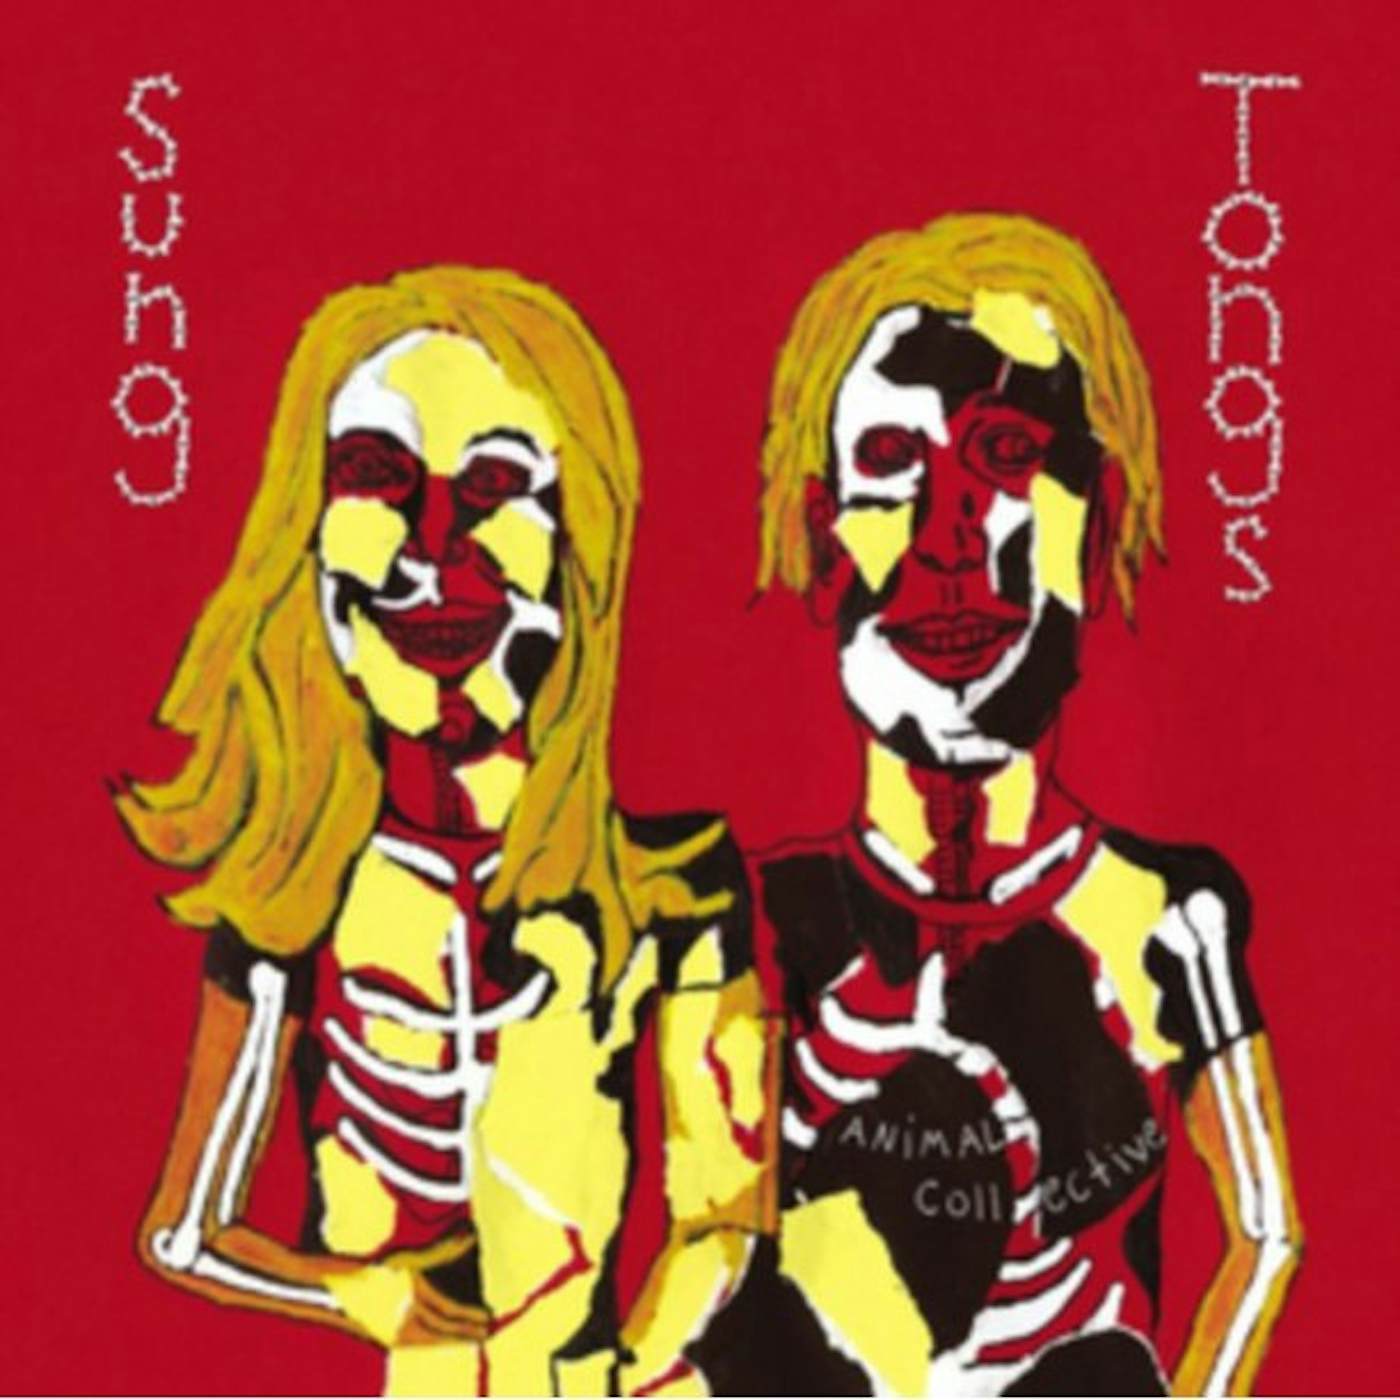 Animal Collective Sung Tongs Vinyl Record